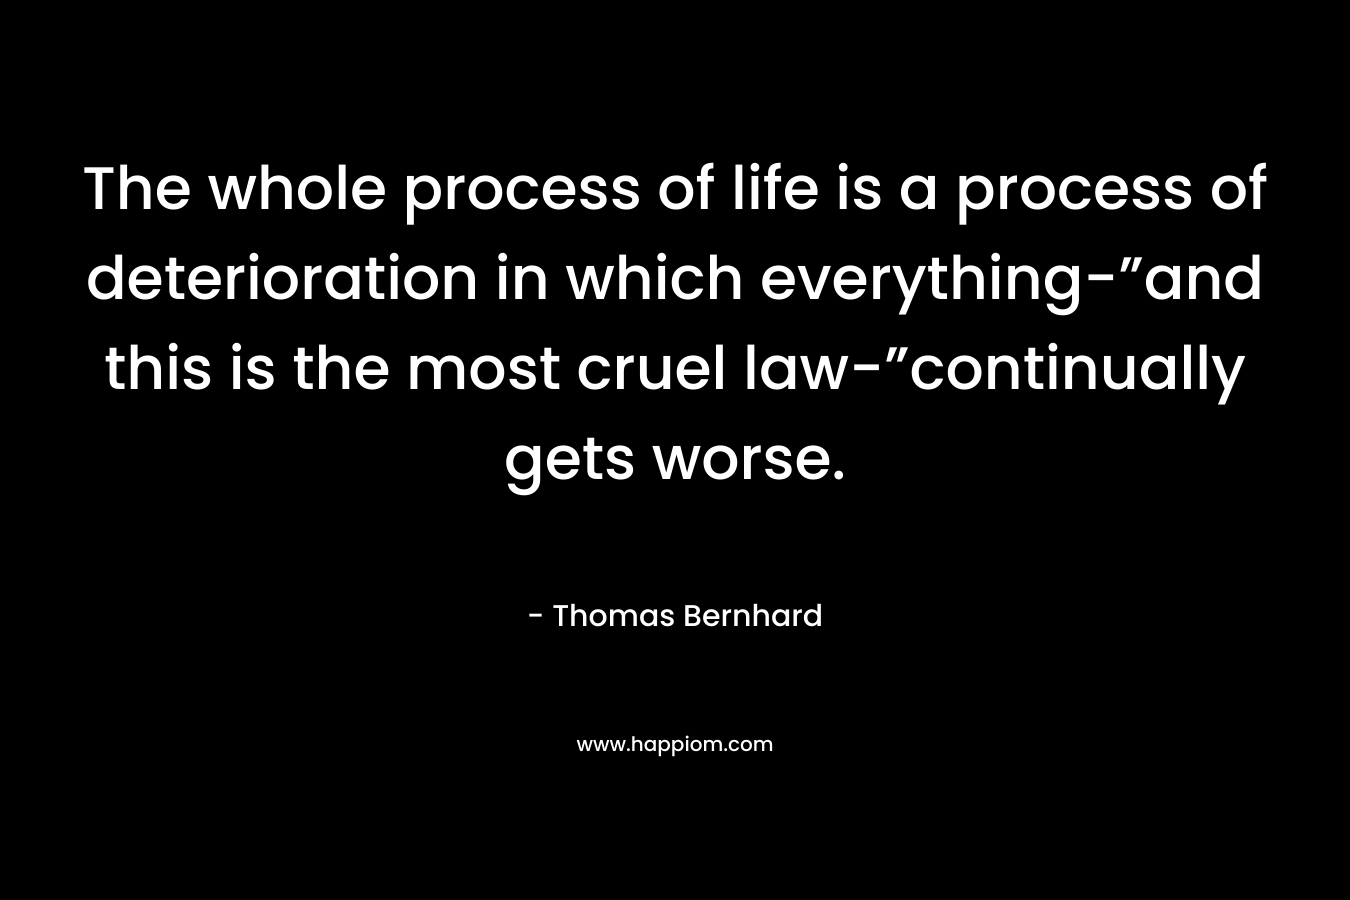 The whole process of life is a process of deterioration in which everything-”and this is the most cruel law-”continually gets worse.